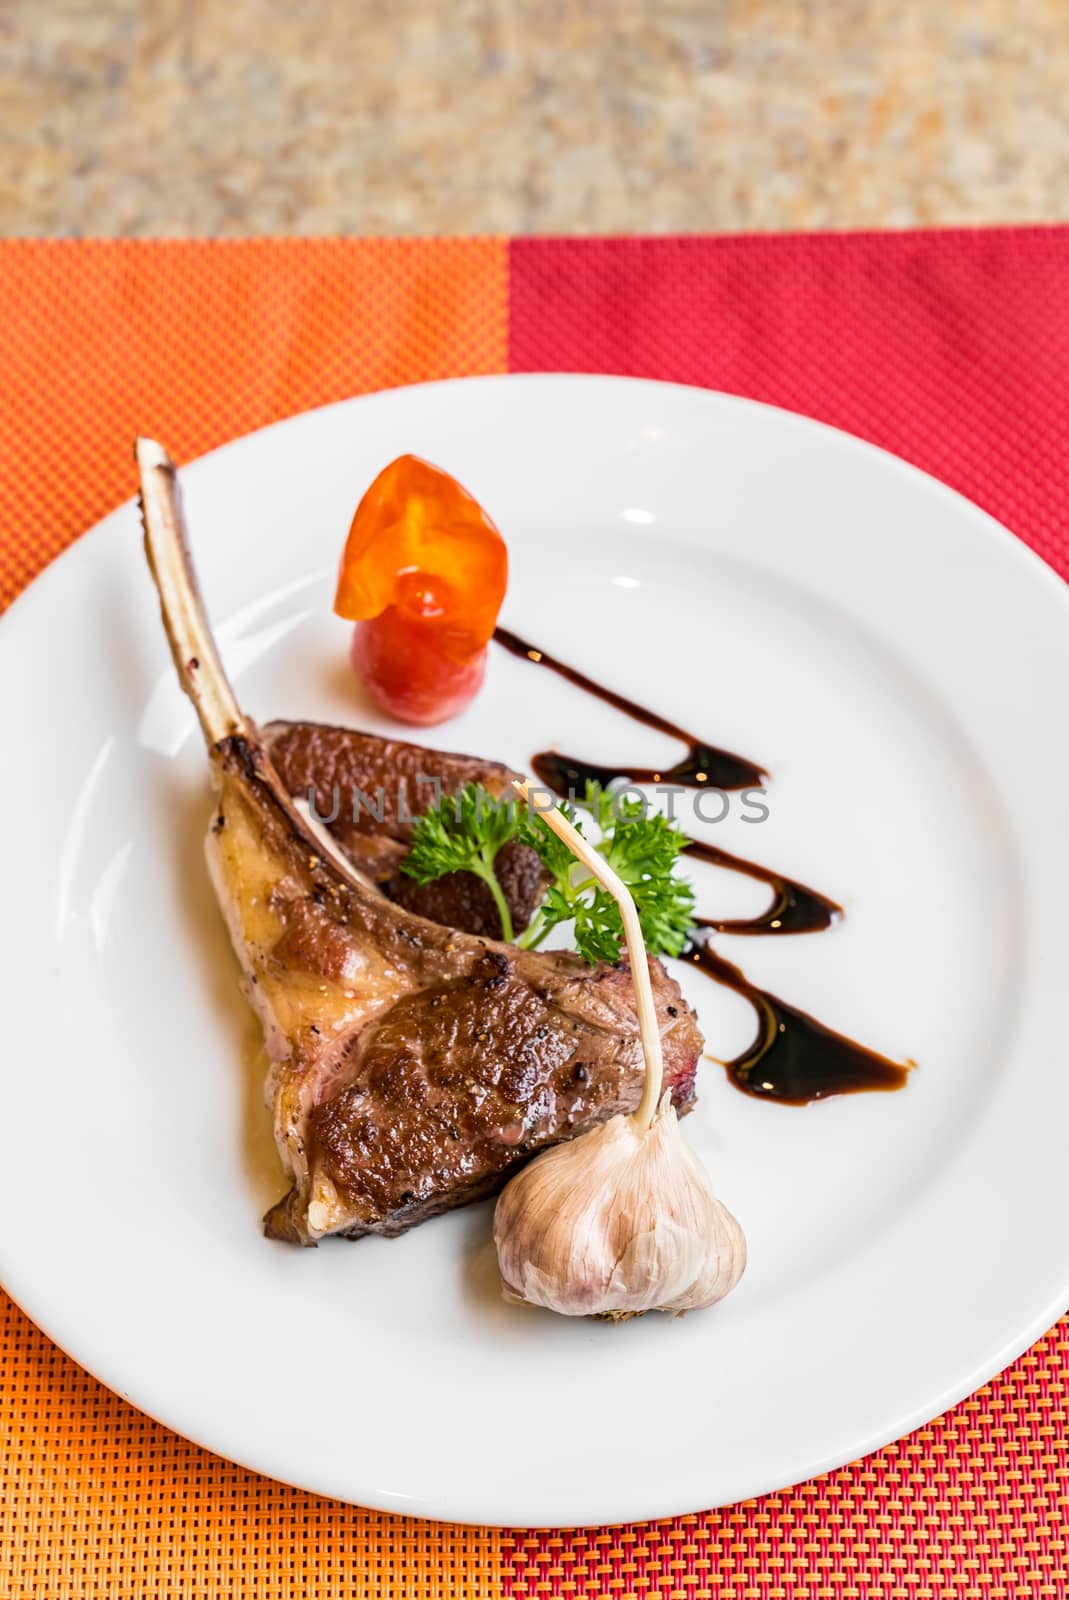 Grilled Lamb chop with garlic